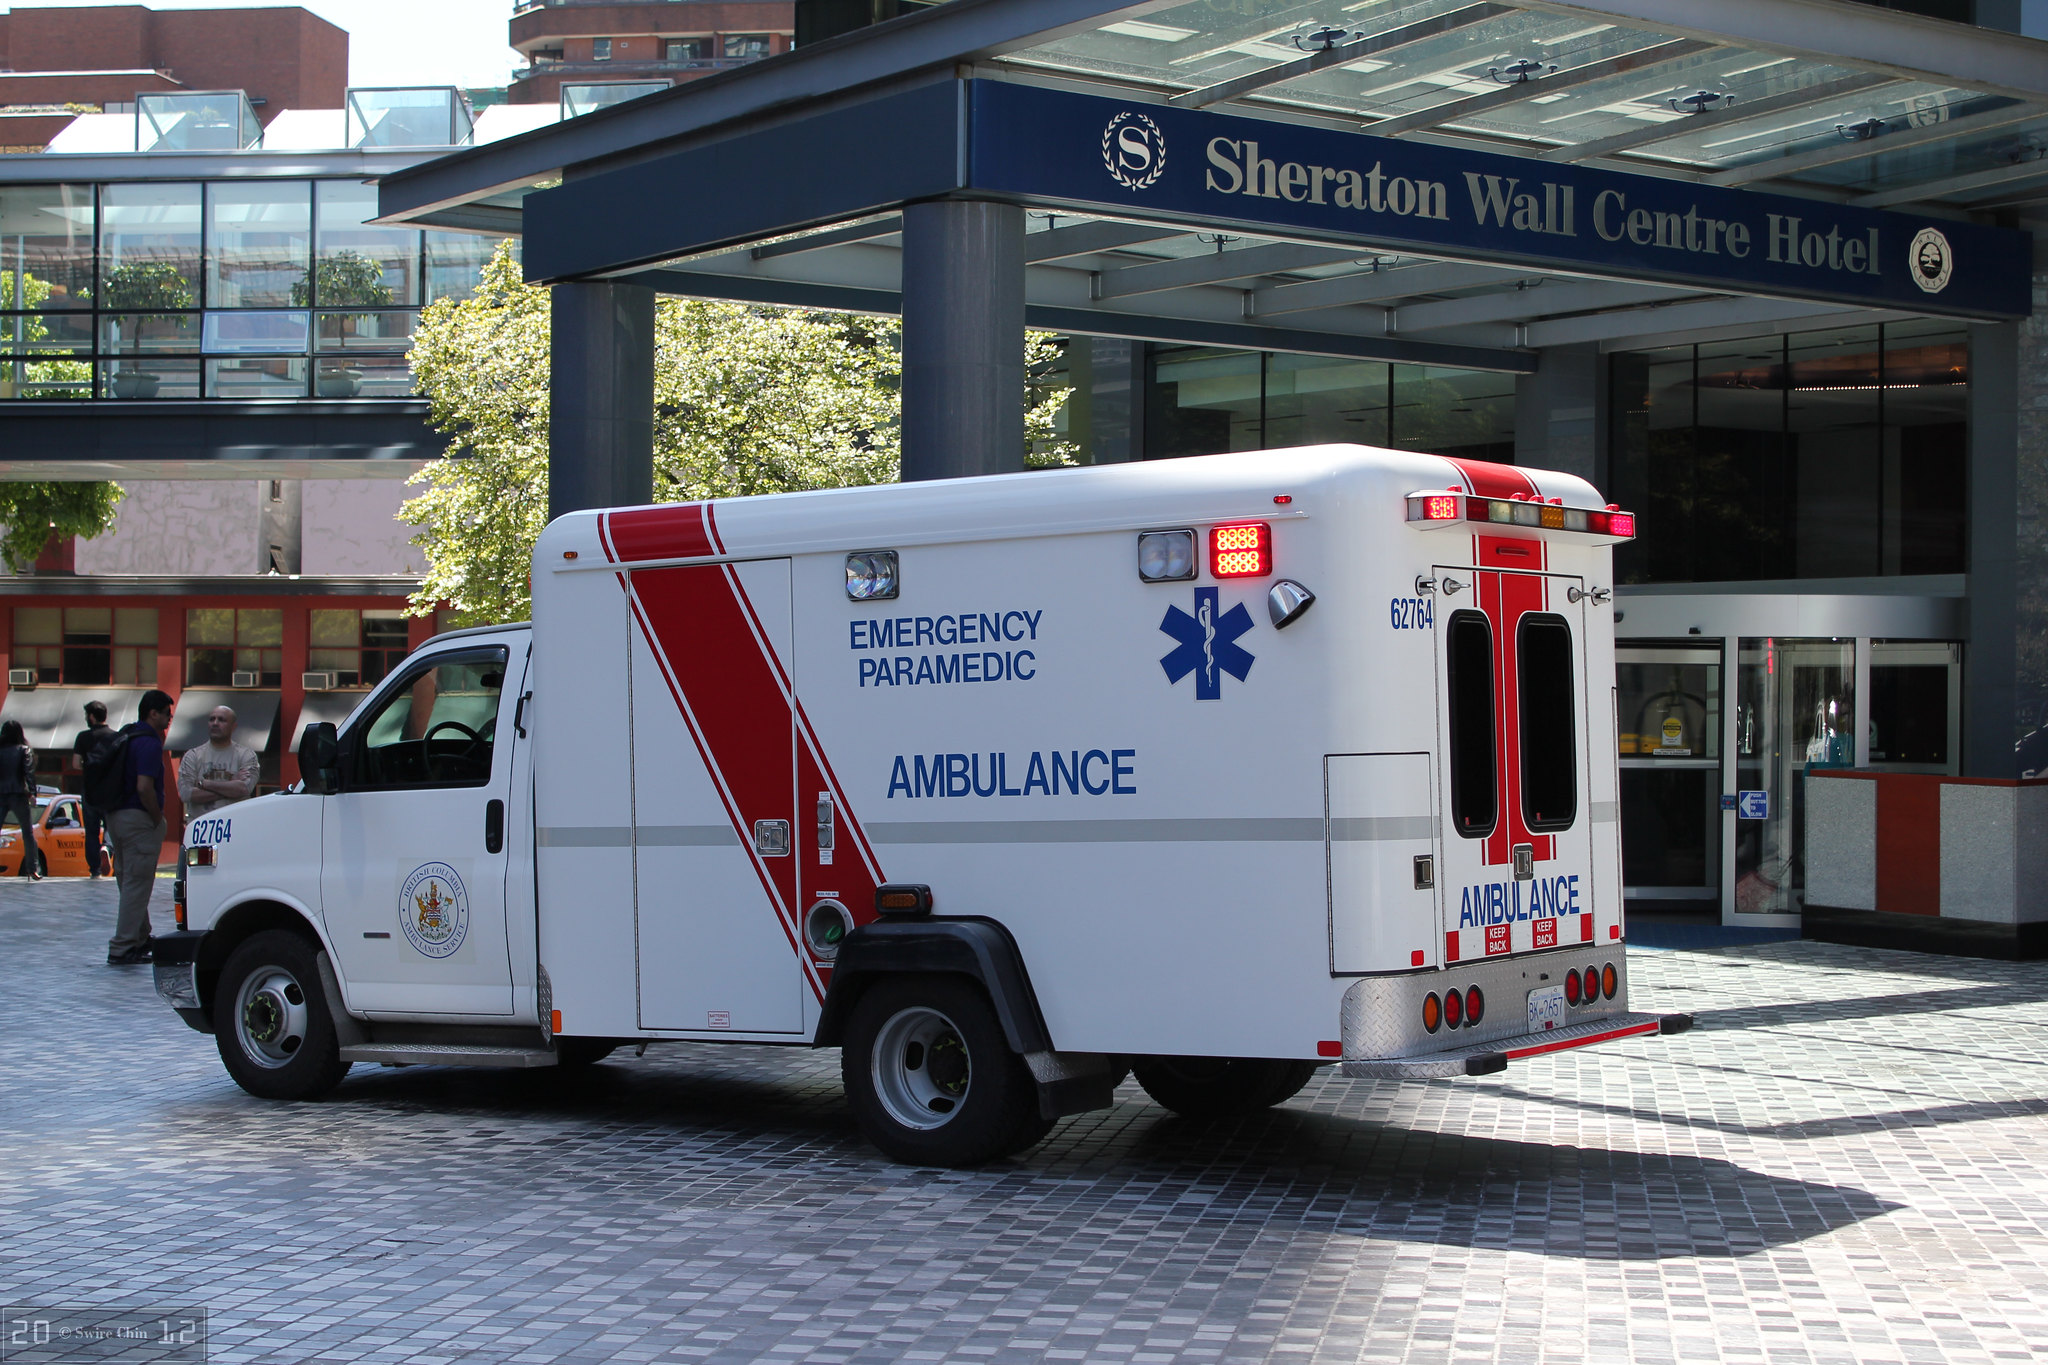 An ambulance parked outside a covered hotel entrance.